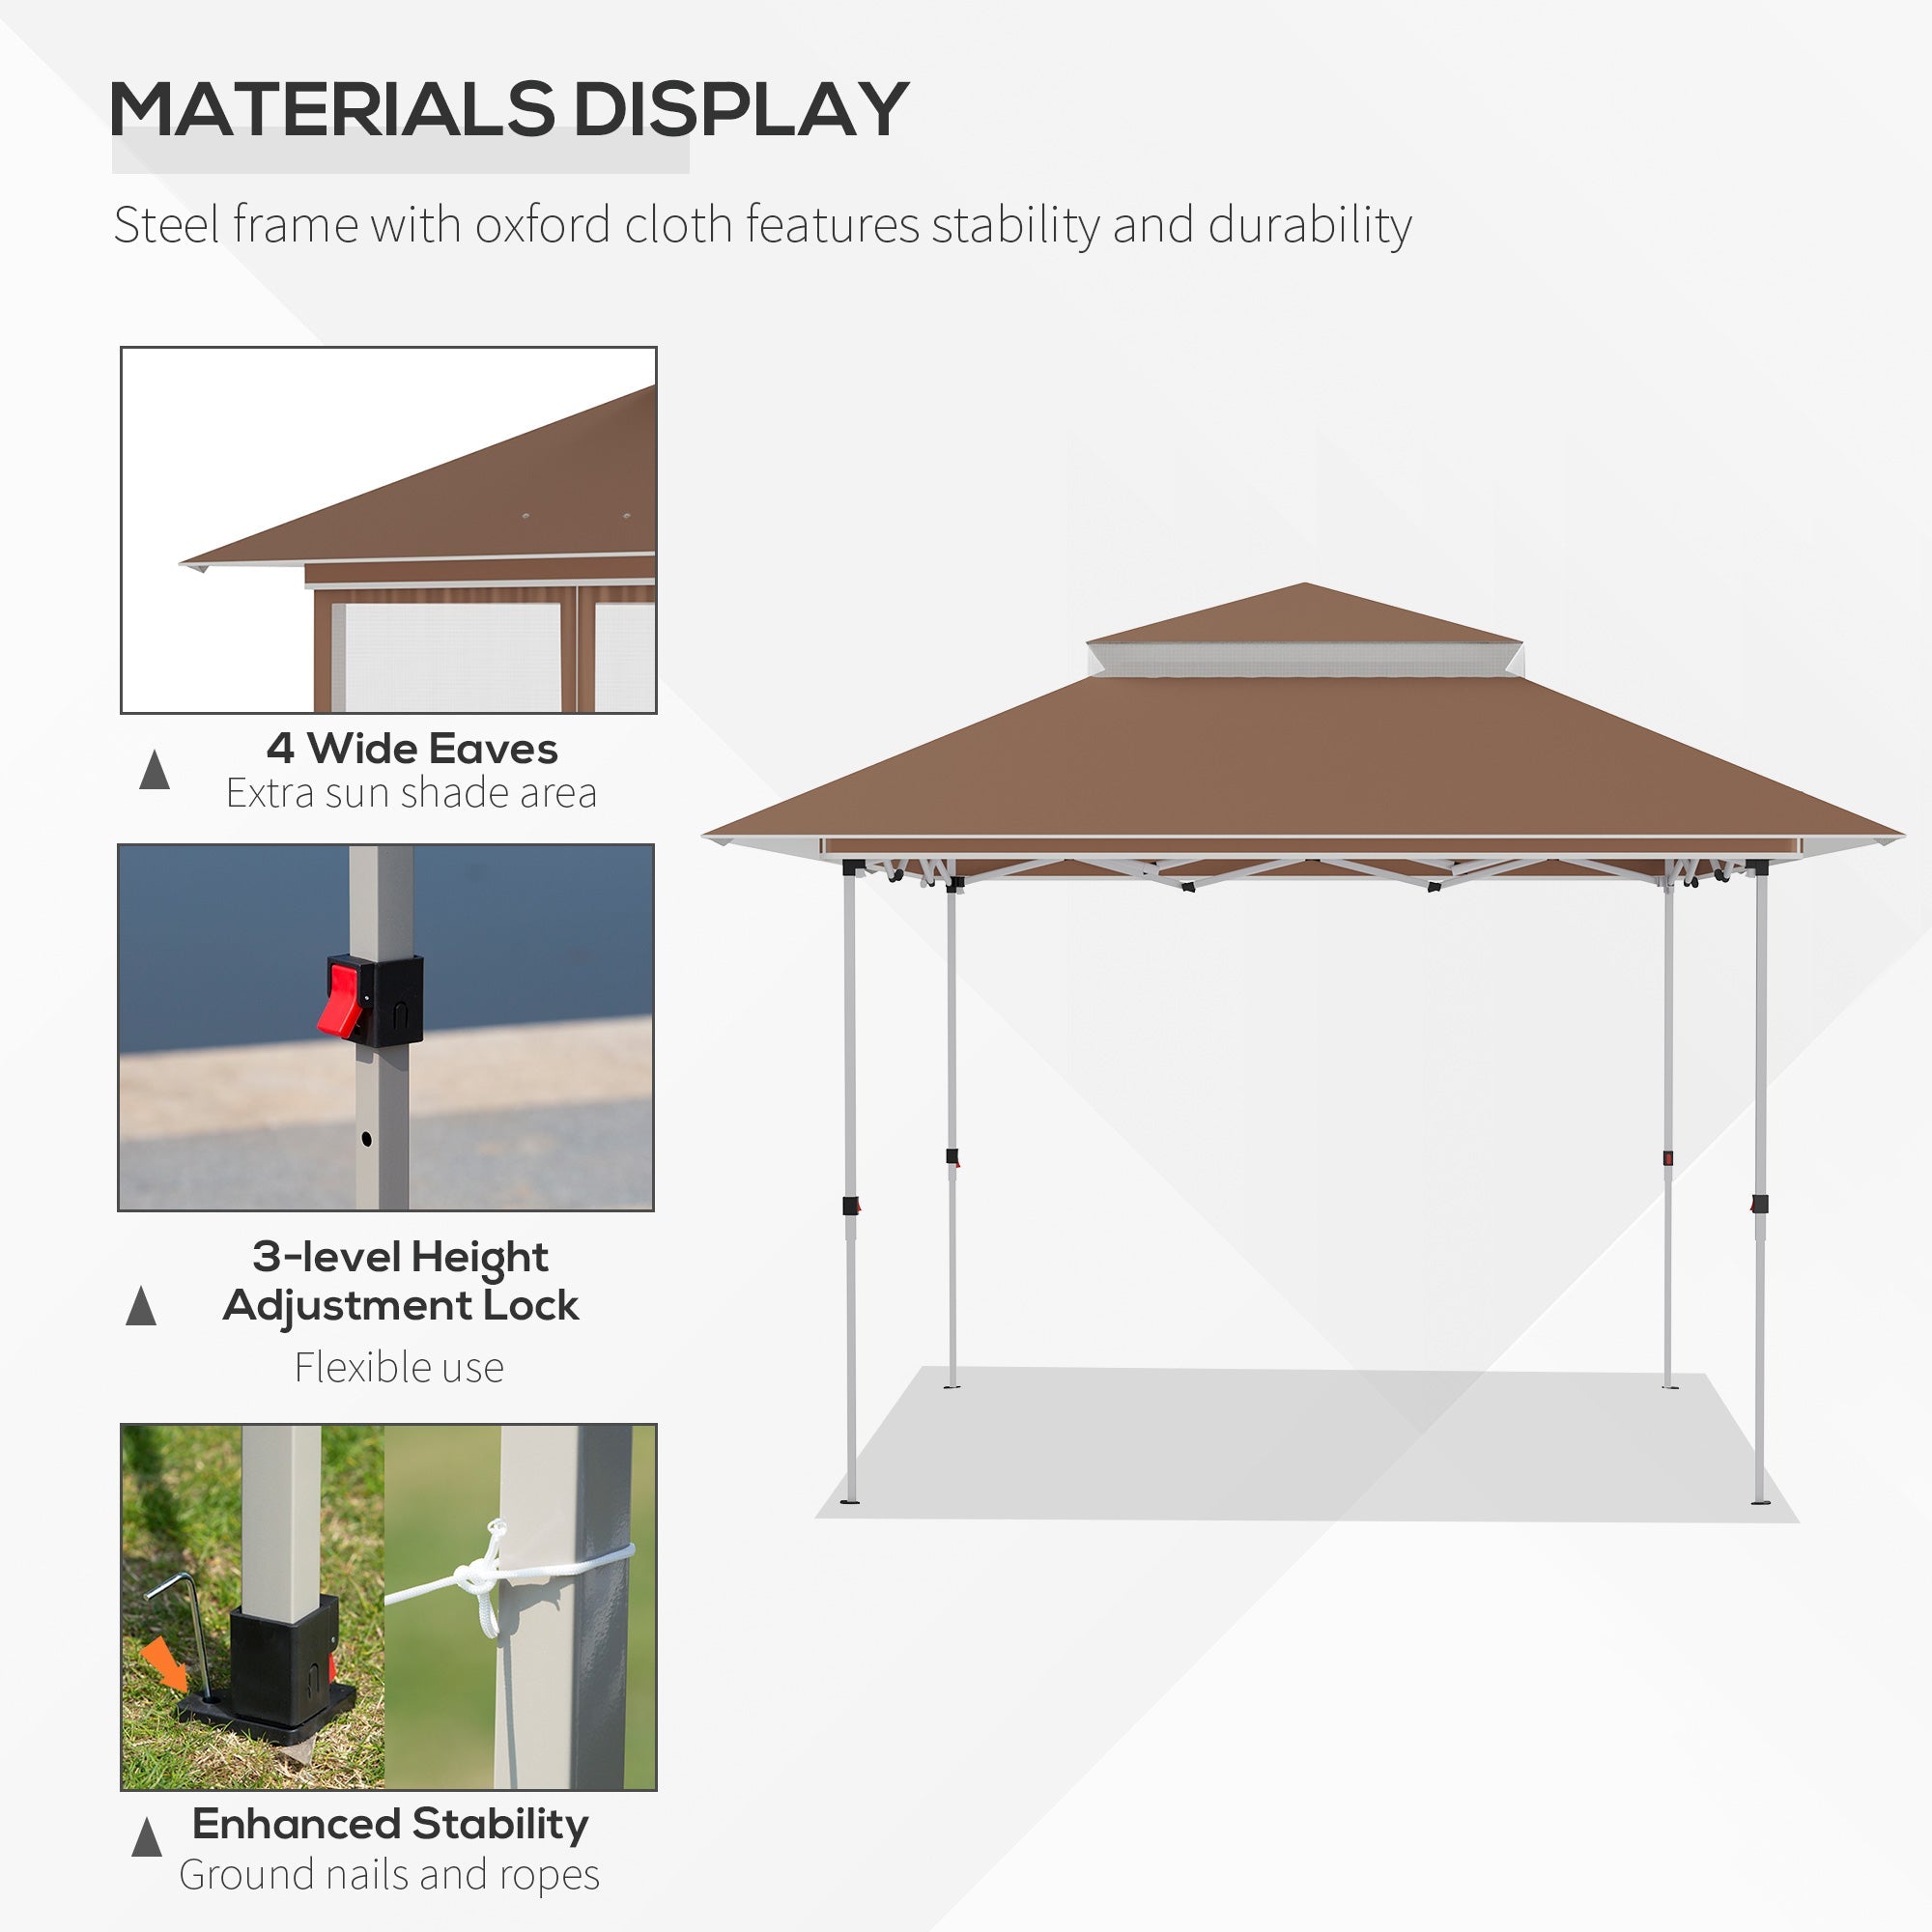 Outsunny 12' x 12' Pop Up Canopy Tent with Netting and Carry Bag, Instant Sun Shelter, Tents for Parties, Height Adjustable, for Outdoor, Garden, Patio, Khaki